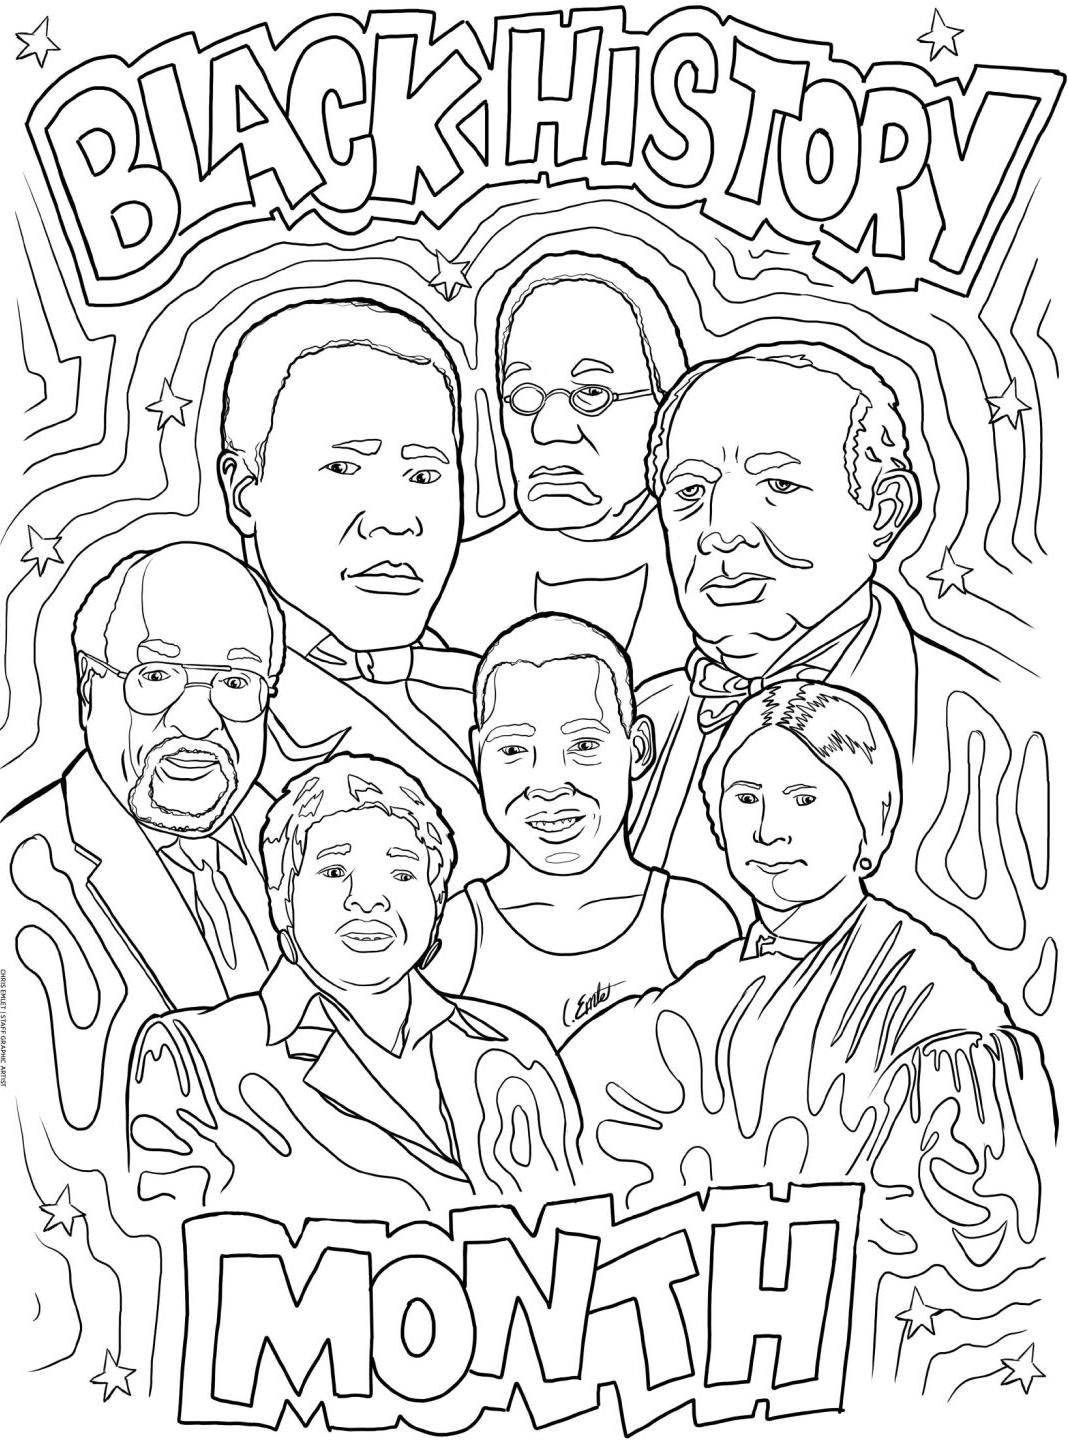 Celebrate black history month download a coloring page featuring extraordinary black individuals from lancaster local news